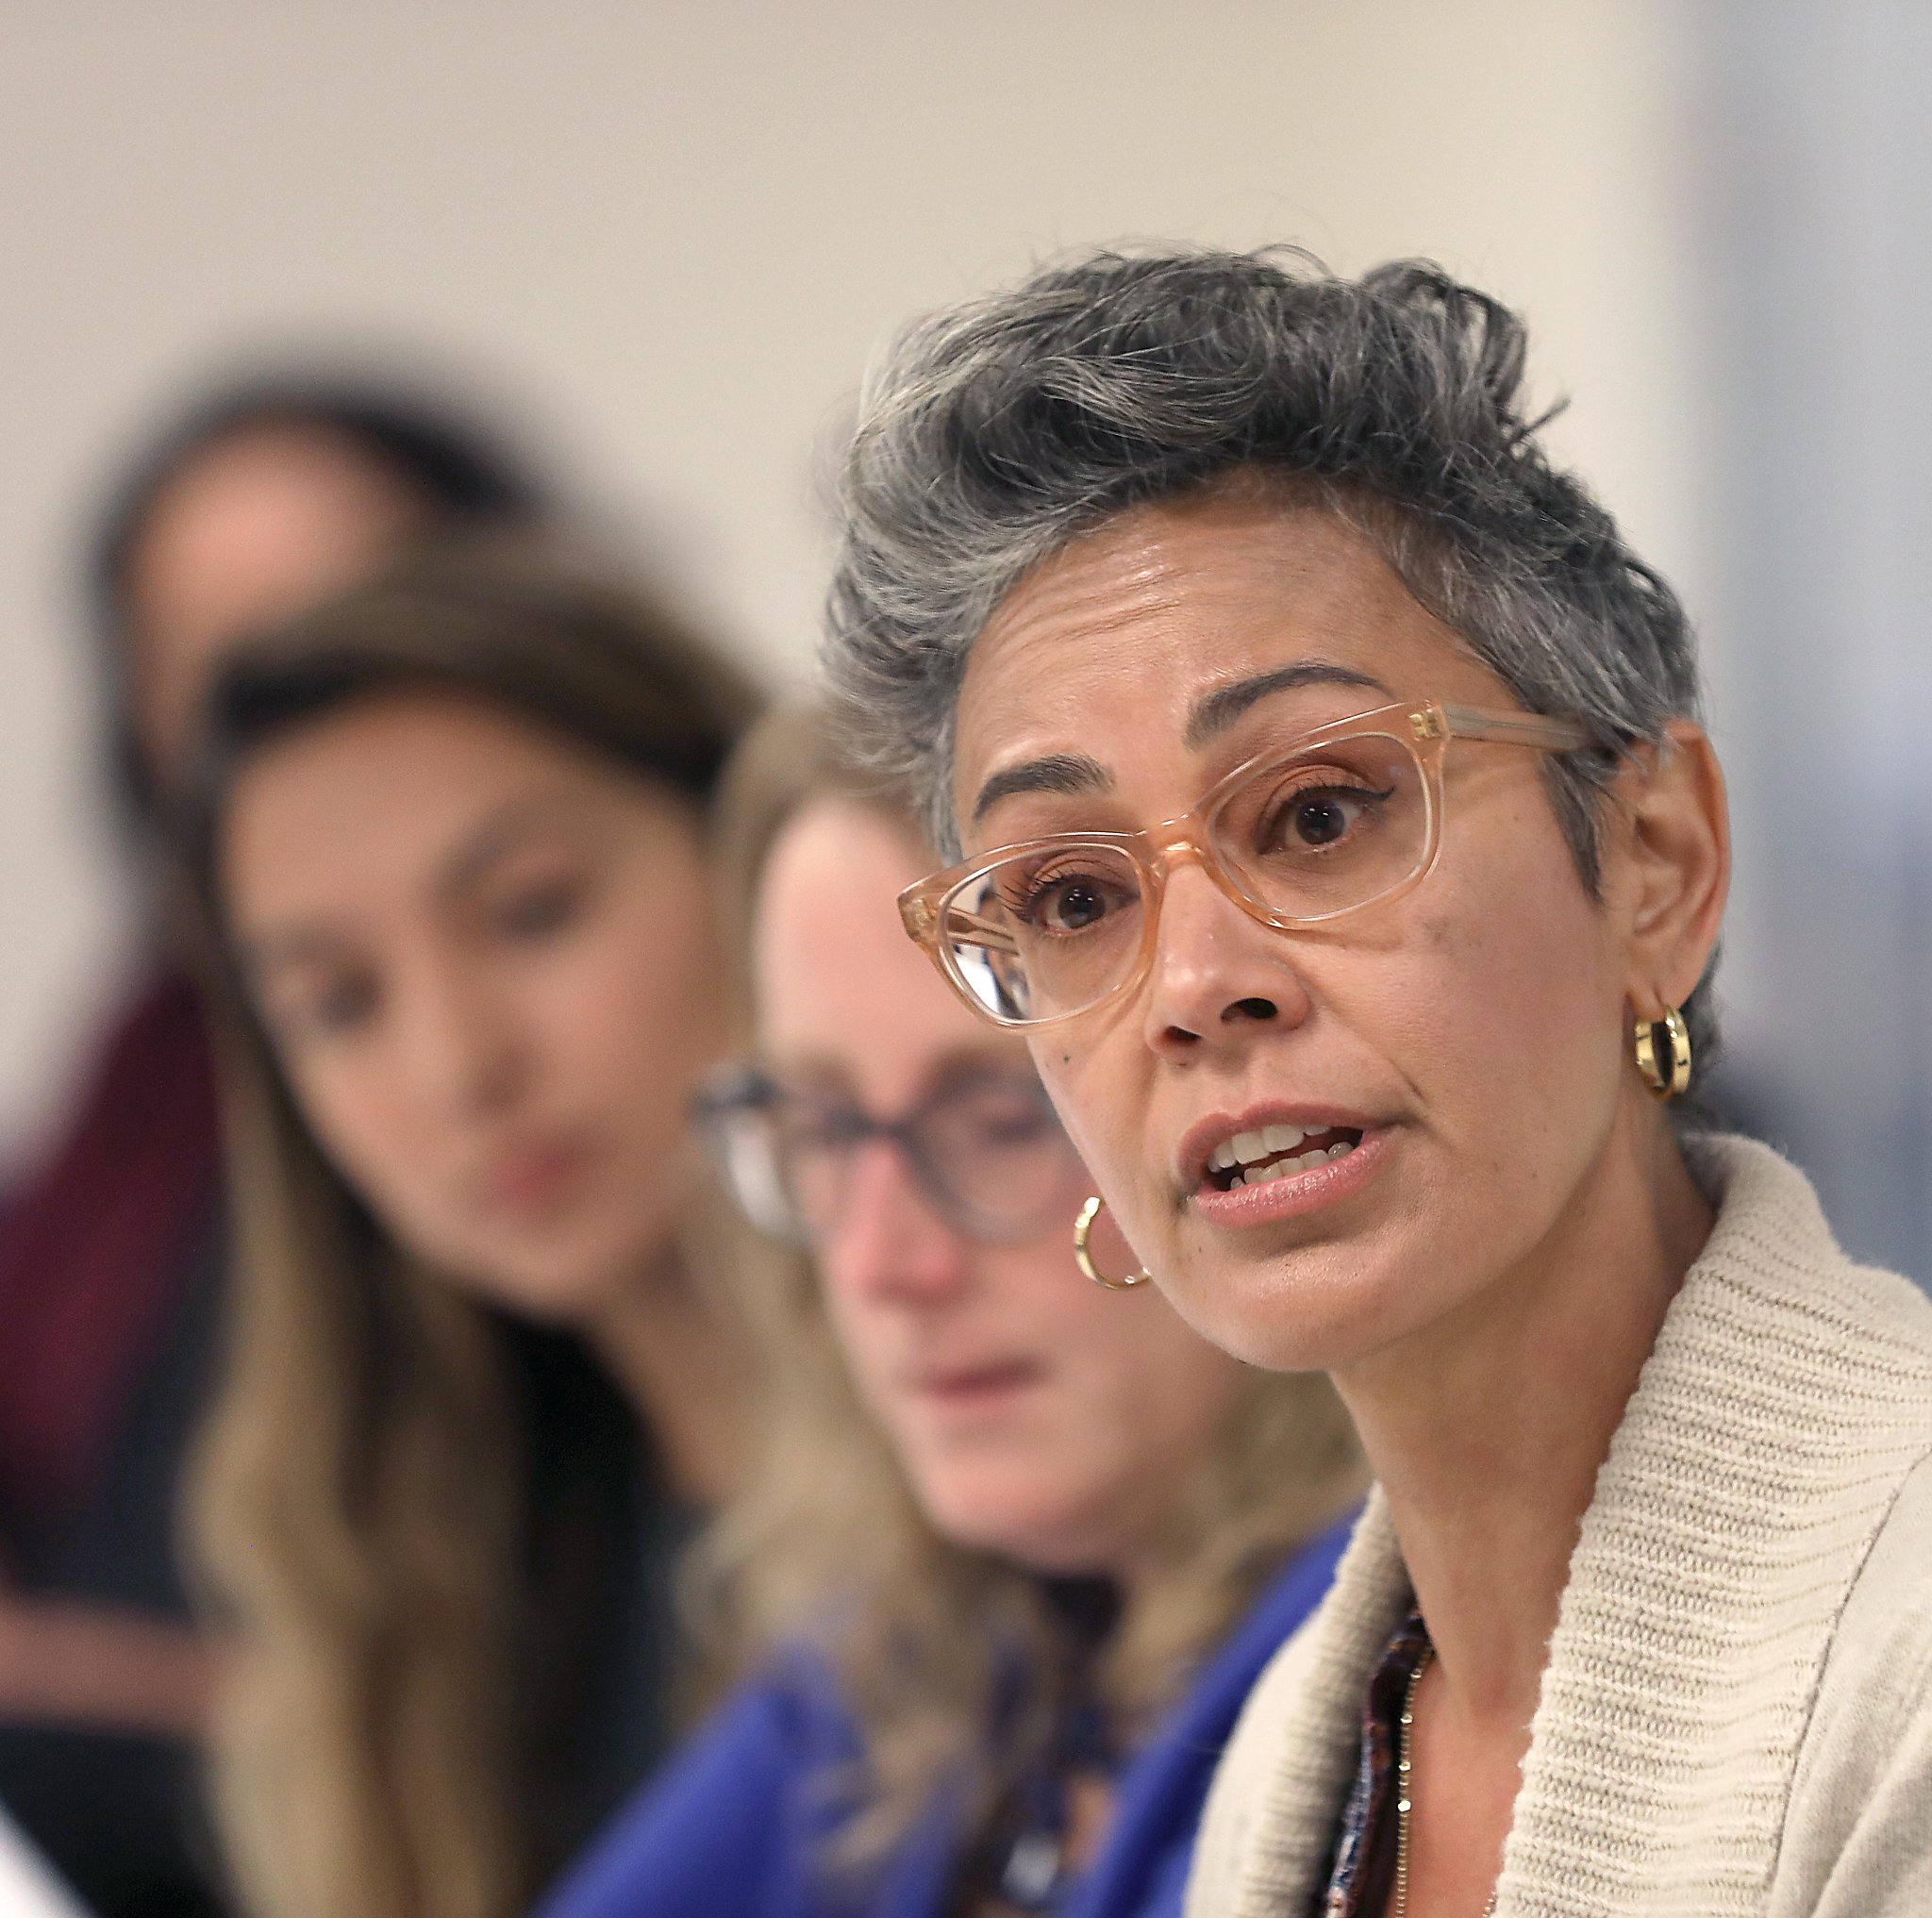 What the SF school board’s division on racist tweets means for the district: ‘Governance crisis’